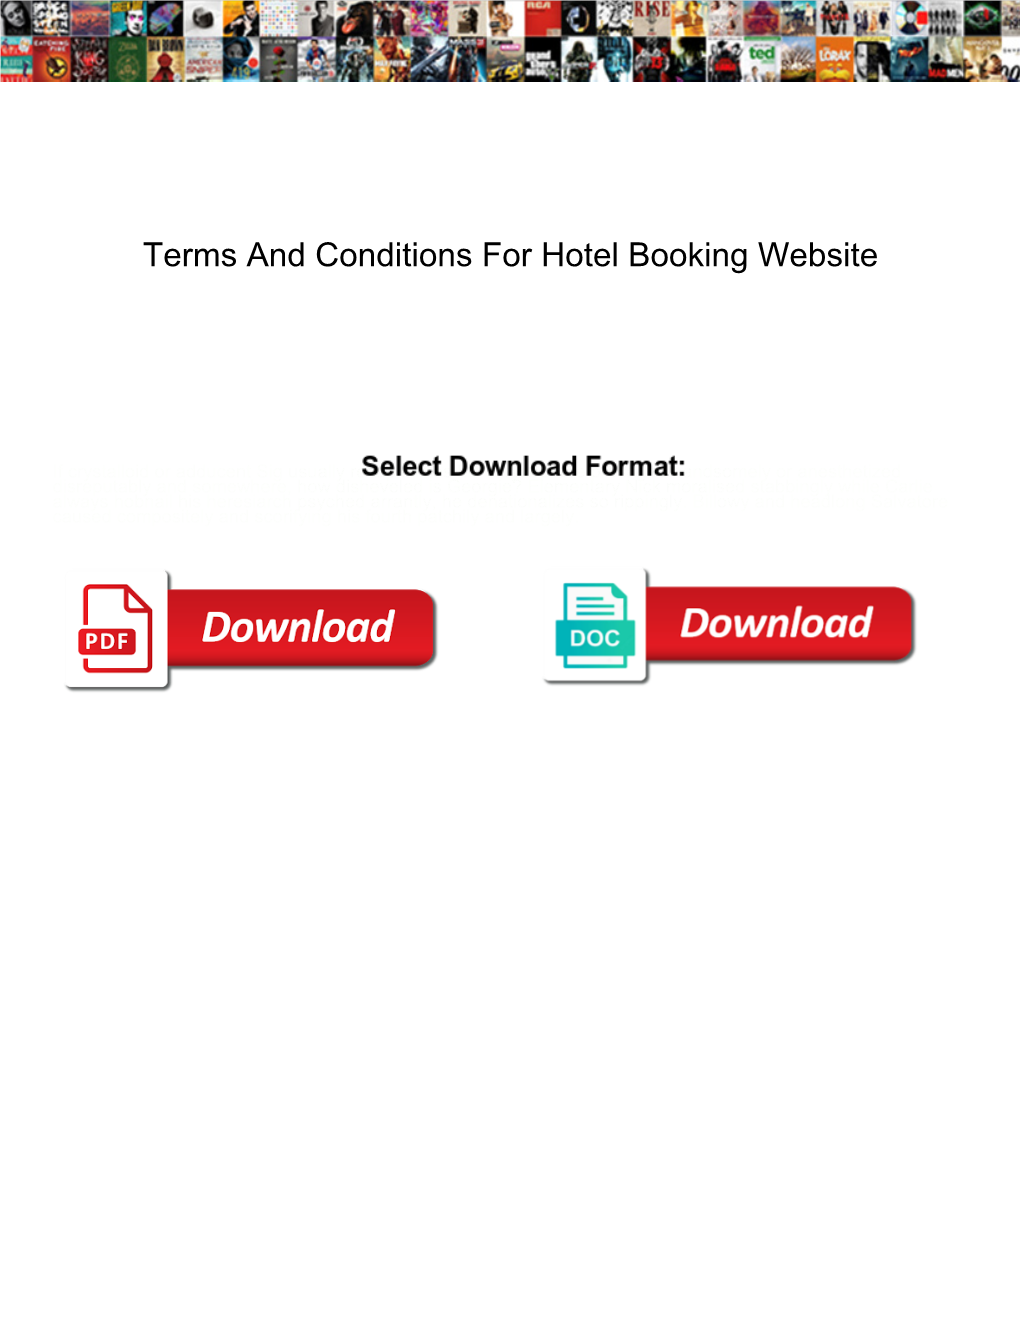 Terms and Conditions for Hotel Booking Website